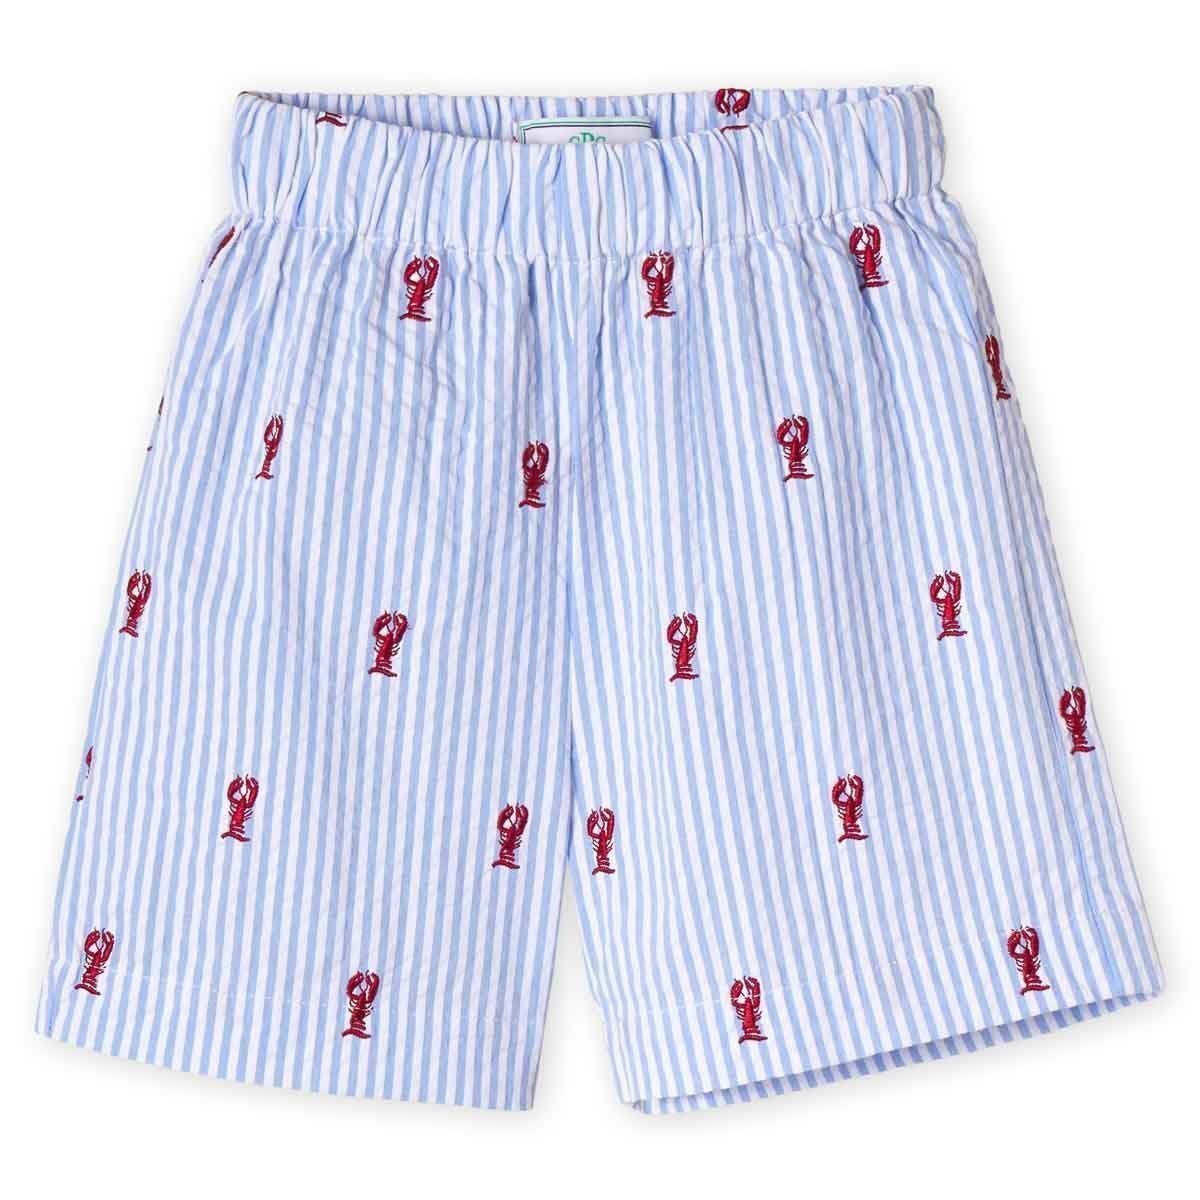 Classic and Preppy Dylan Short, Vista Blue Seersucker Lobster Embroidery-Bottoms-Lobsters on Vista Blue Seersucker-9-12M-CPC - Classic Prep Childrenswear